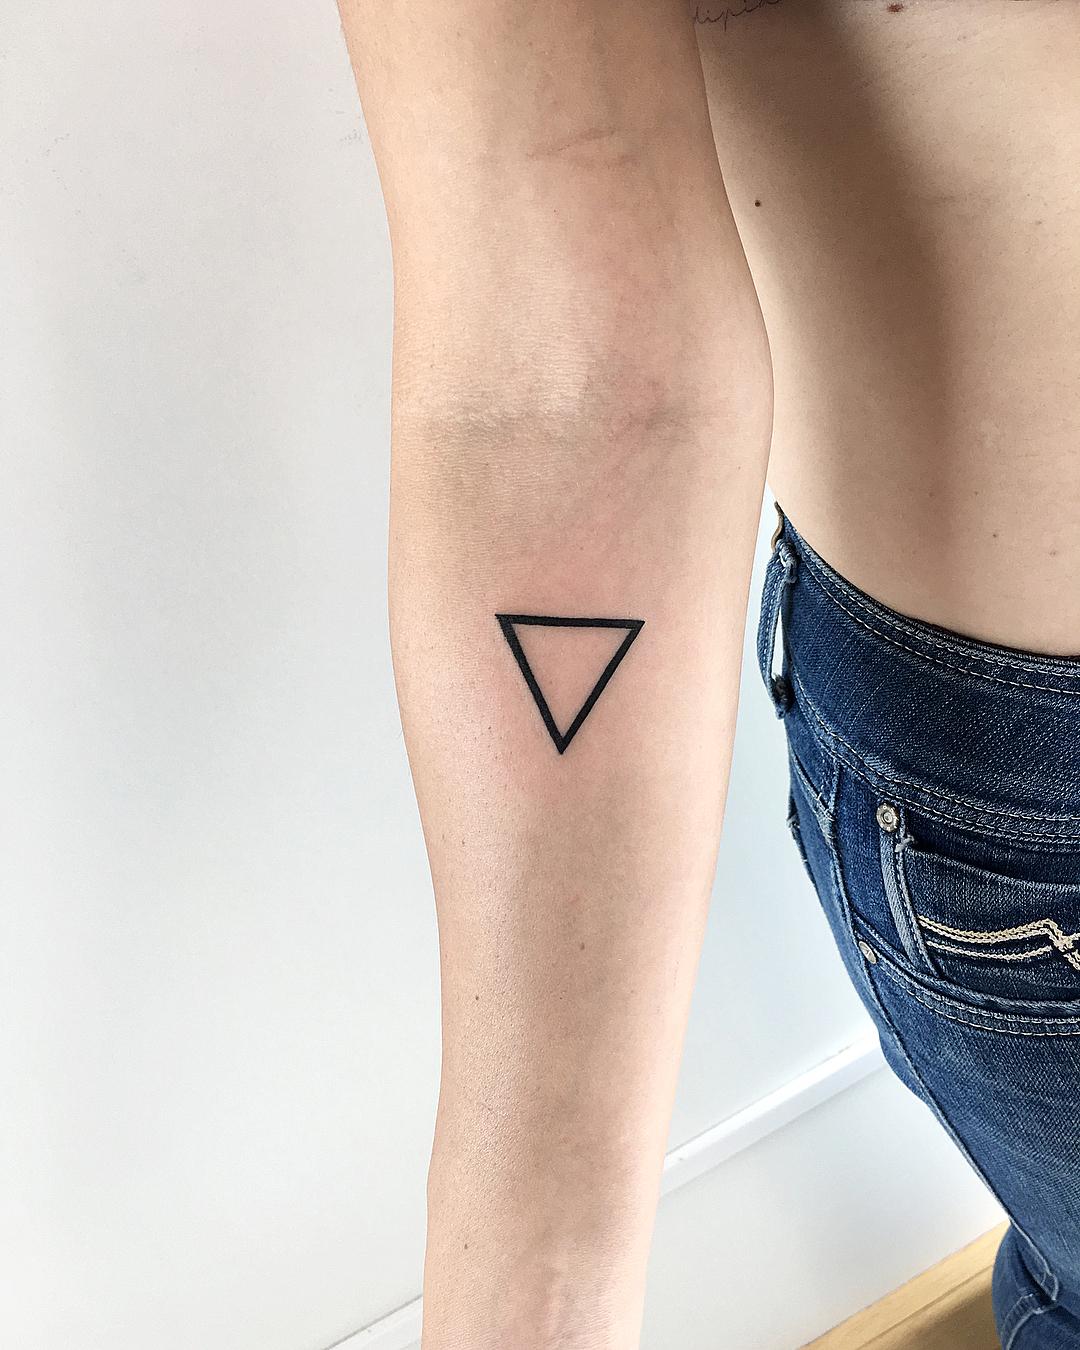 Thick triangle by @soychapa